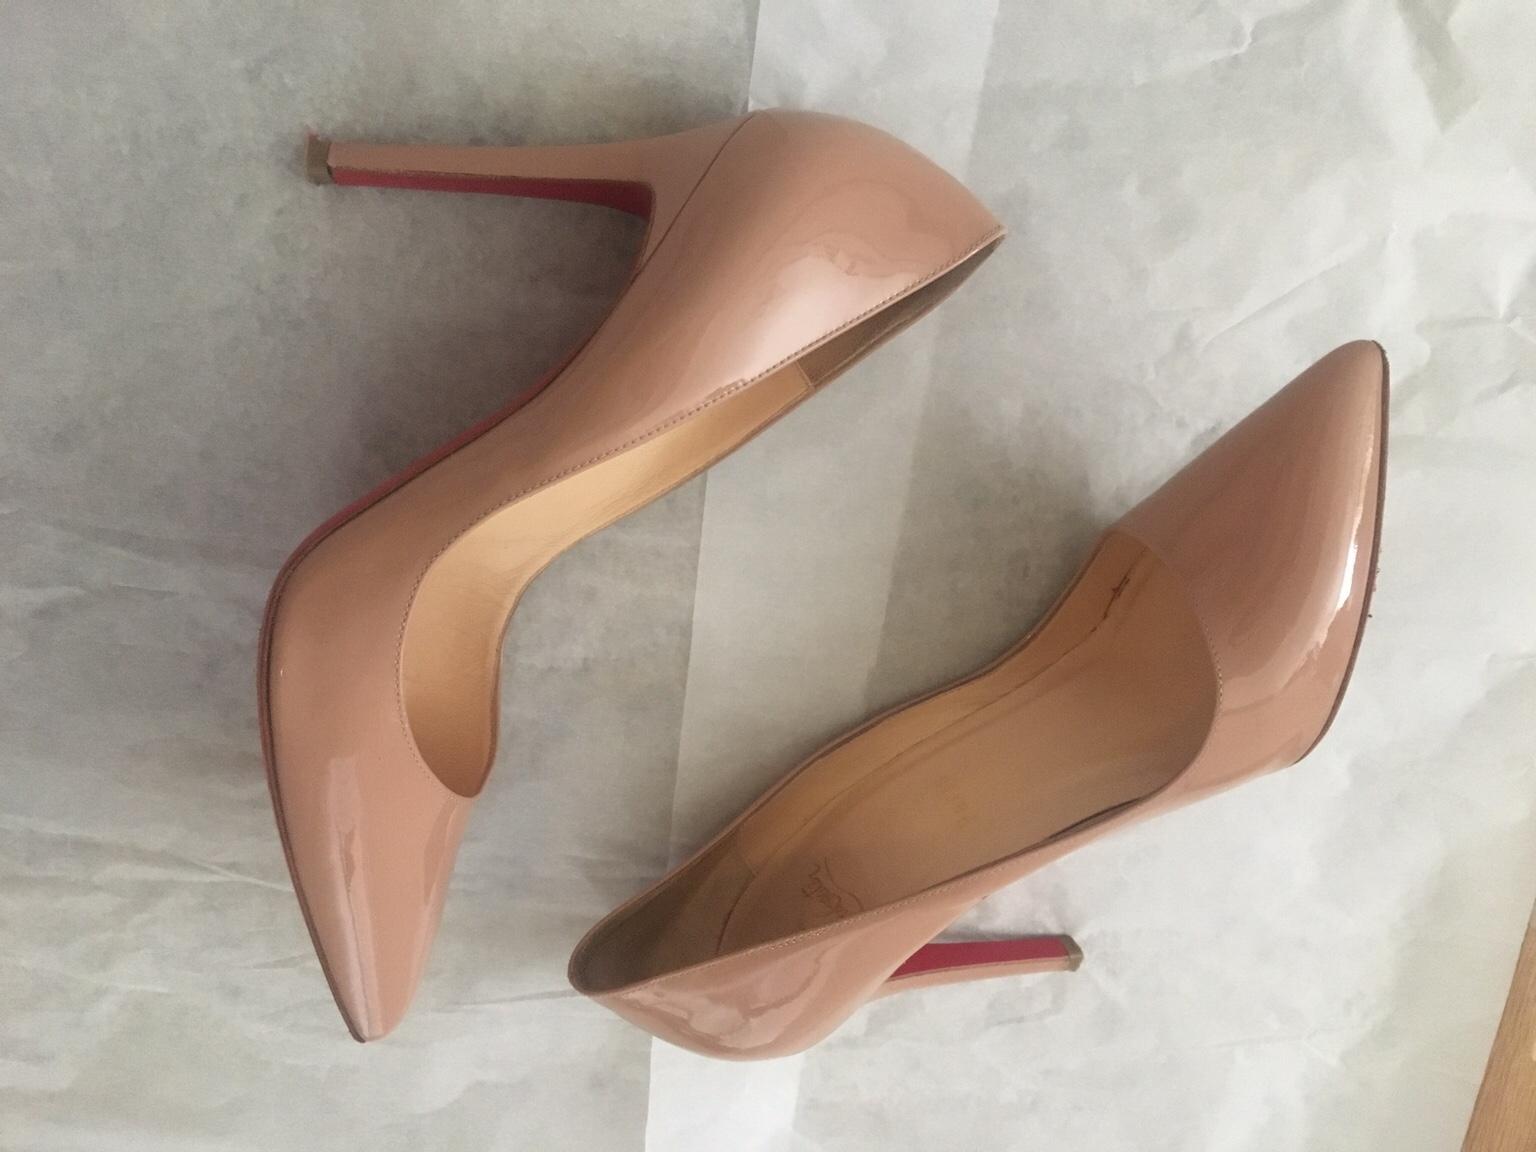 christian louboutin pigalle 100 nude